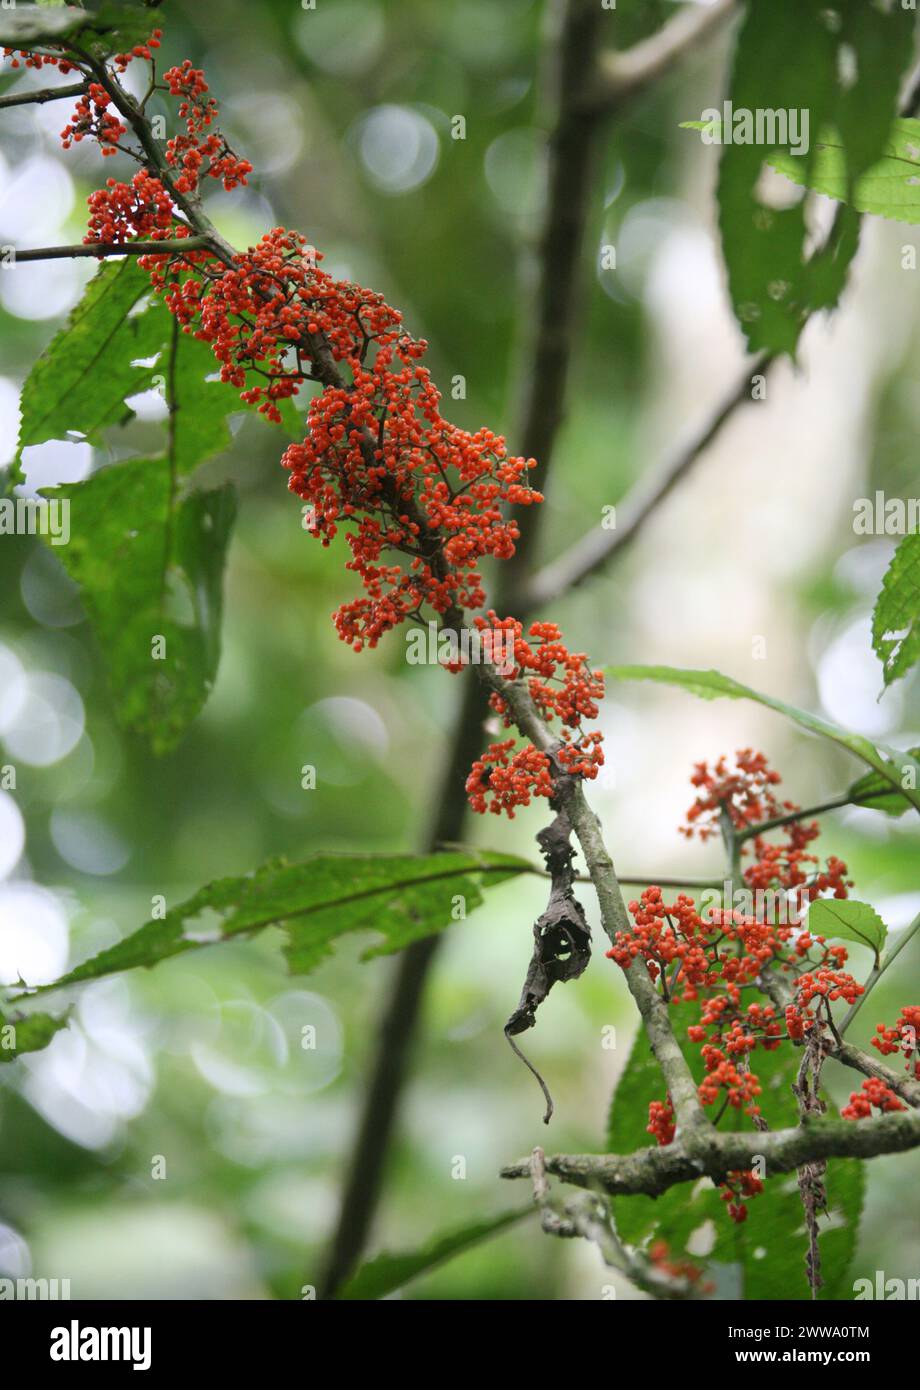 Urera species, probably Flameberry, Urera caracasana, Urticaceae. Tree with orange berries growing directly on branches and tree trunk.  Costa Rica. Stock Photo